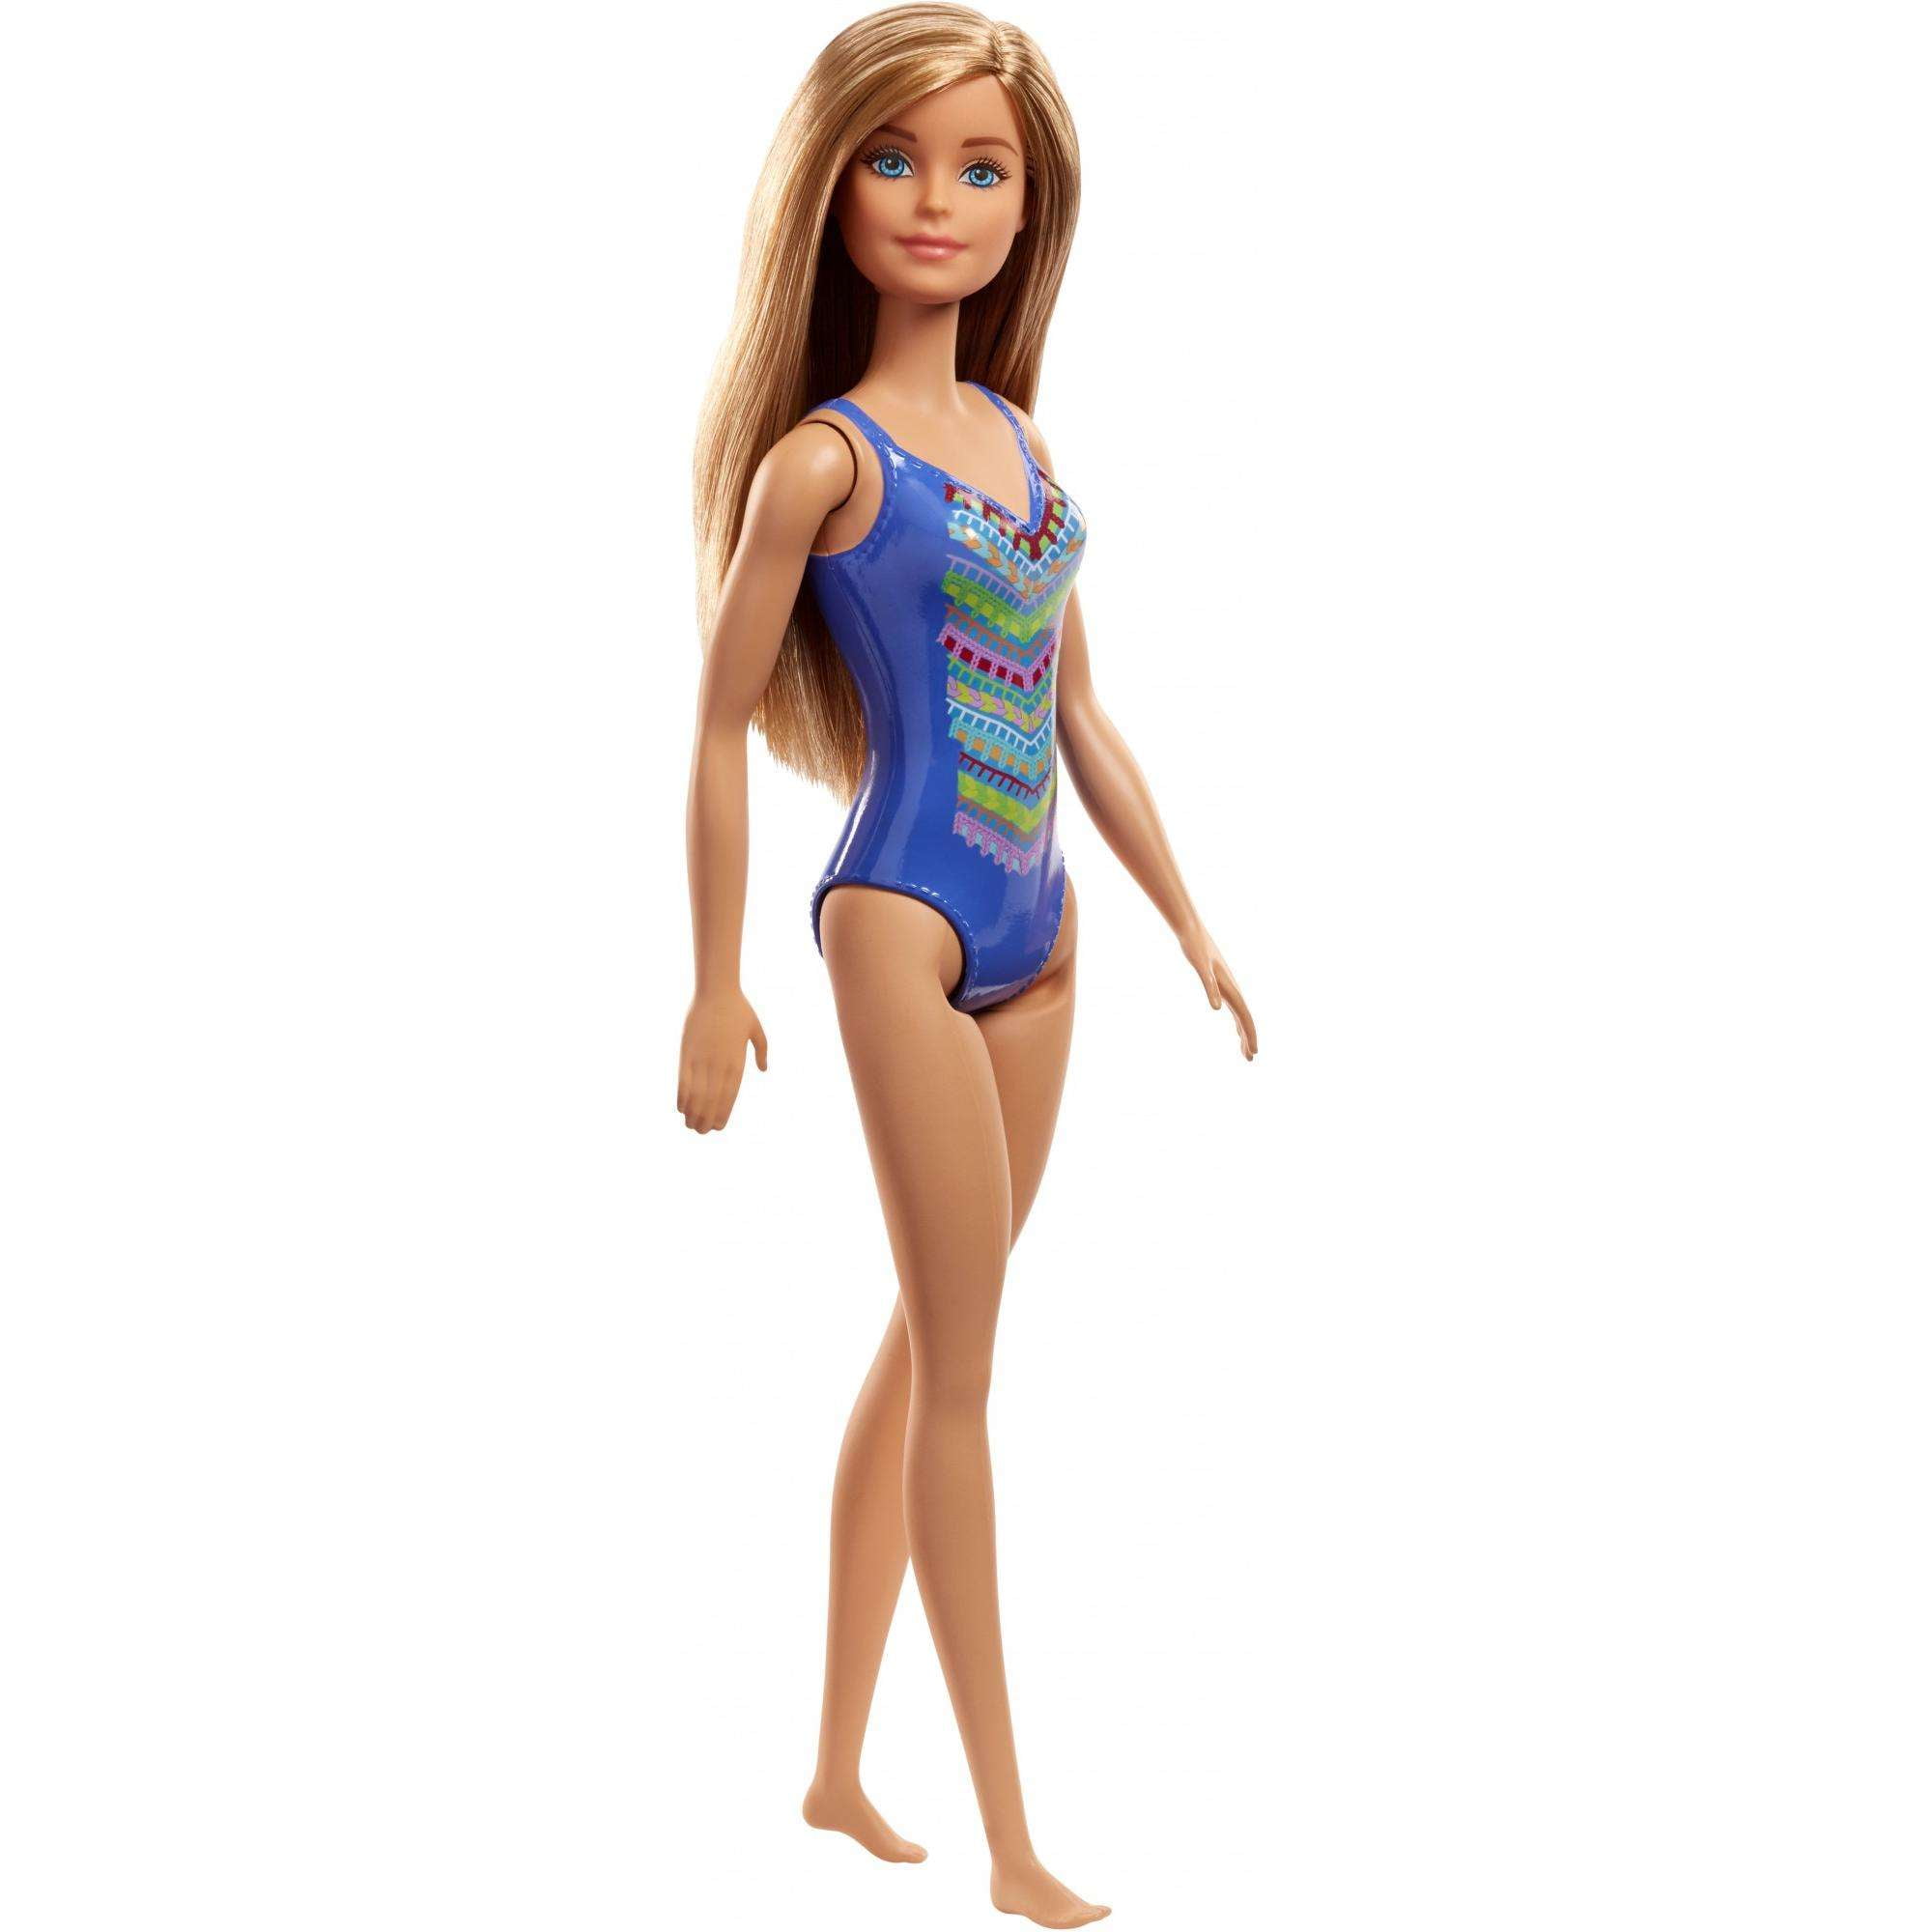 Madeline Doll Swimsuit Complete Outfit 84227 Bathing Suit Beach Towel Bucket 